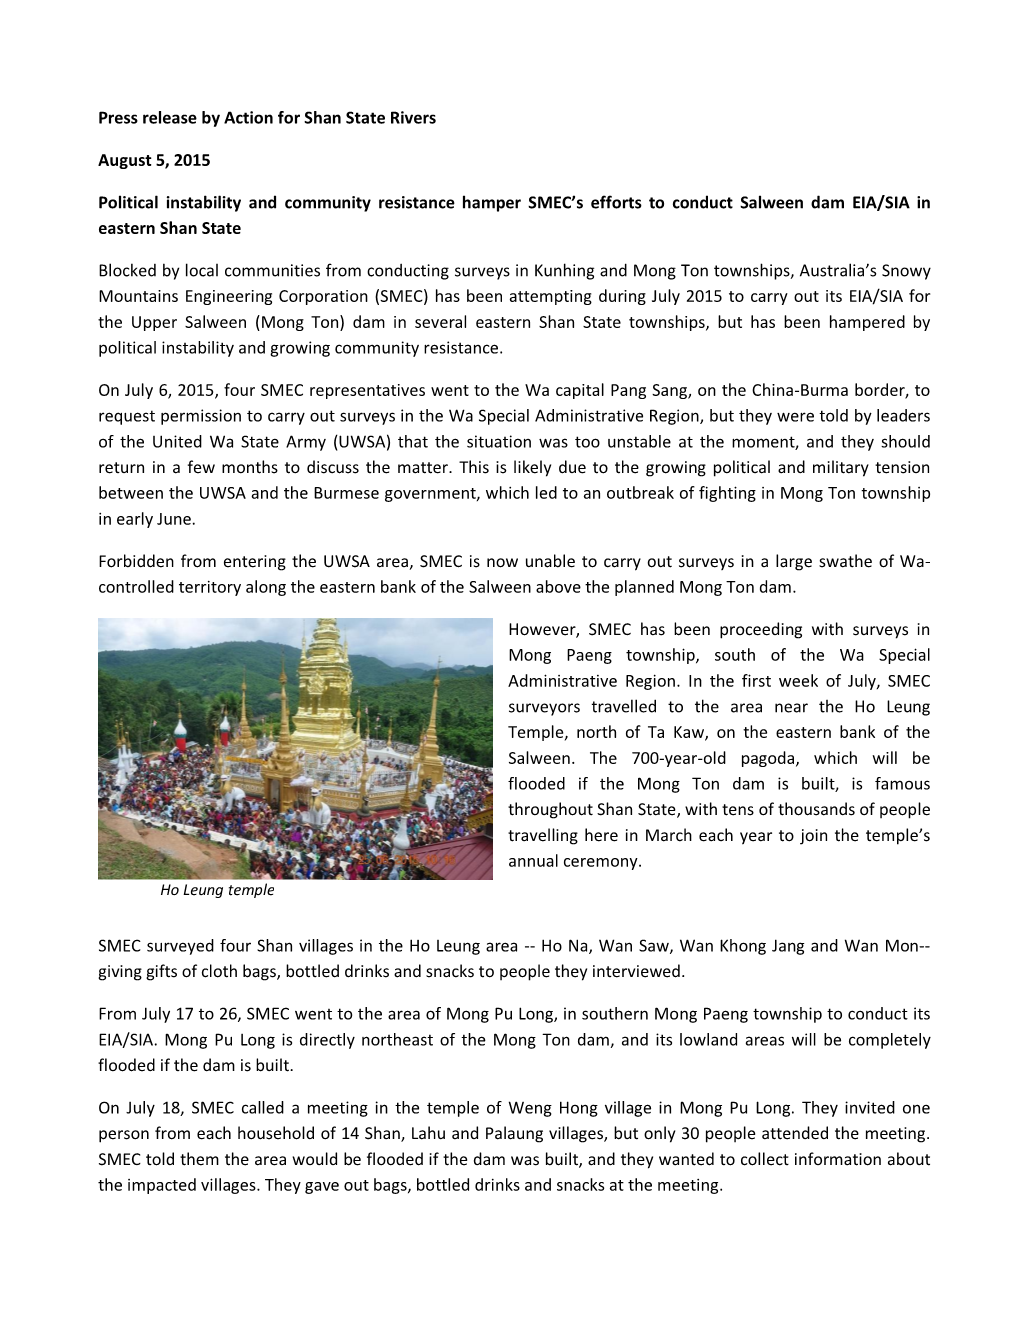 Press Release by Action for Shan State Rivers August 5, 2015 Political